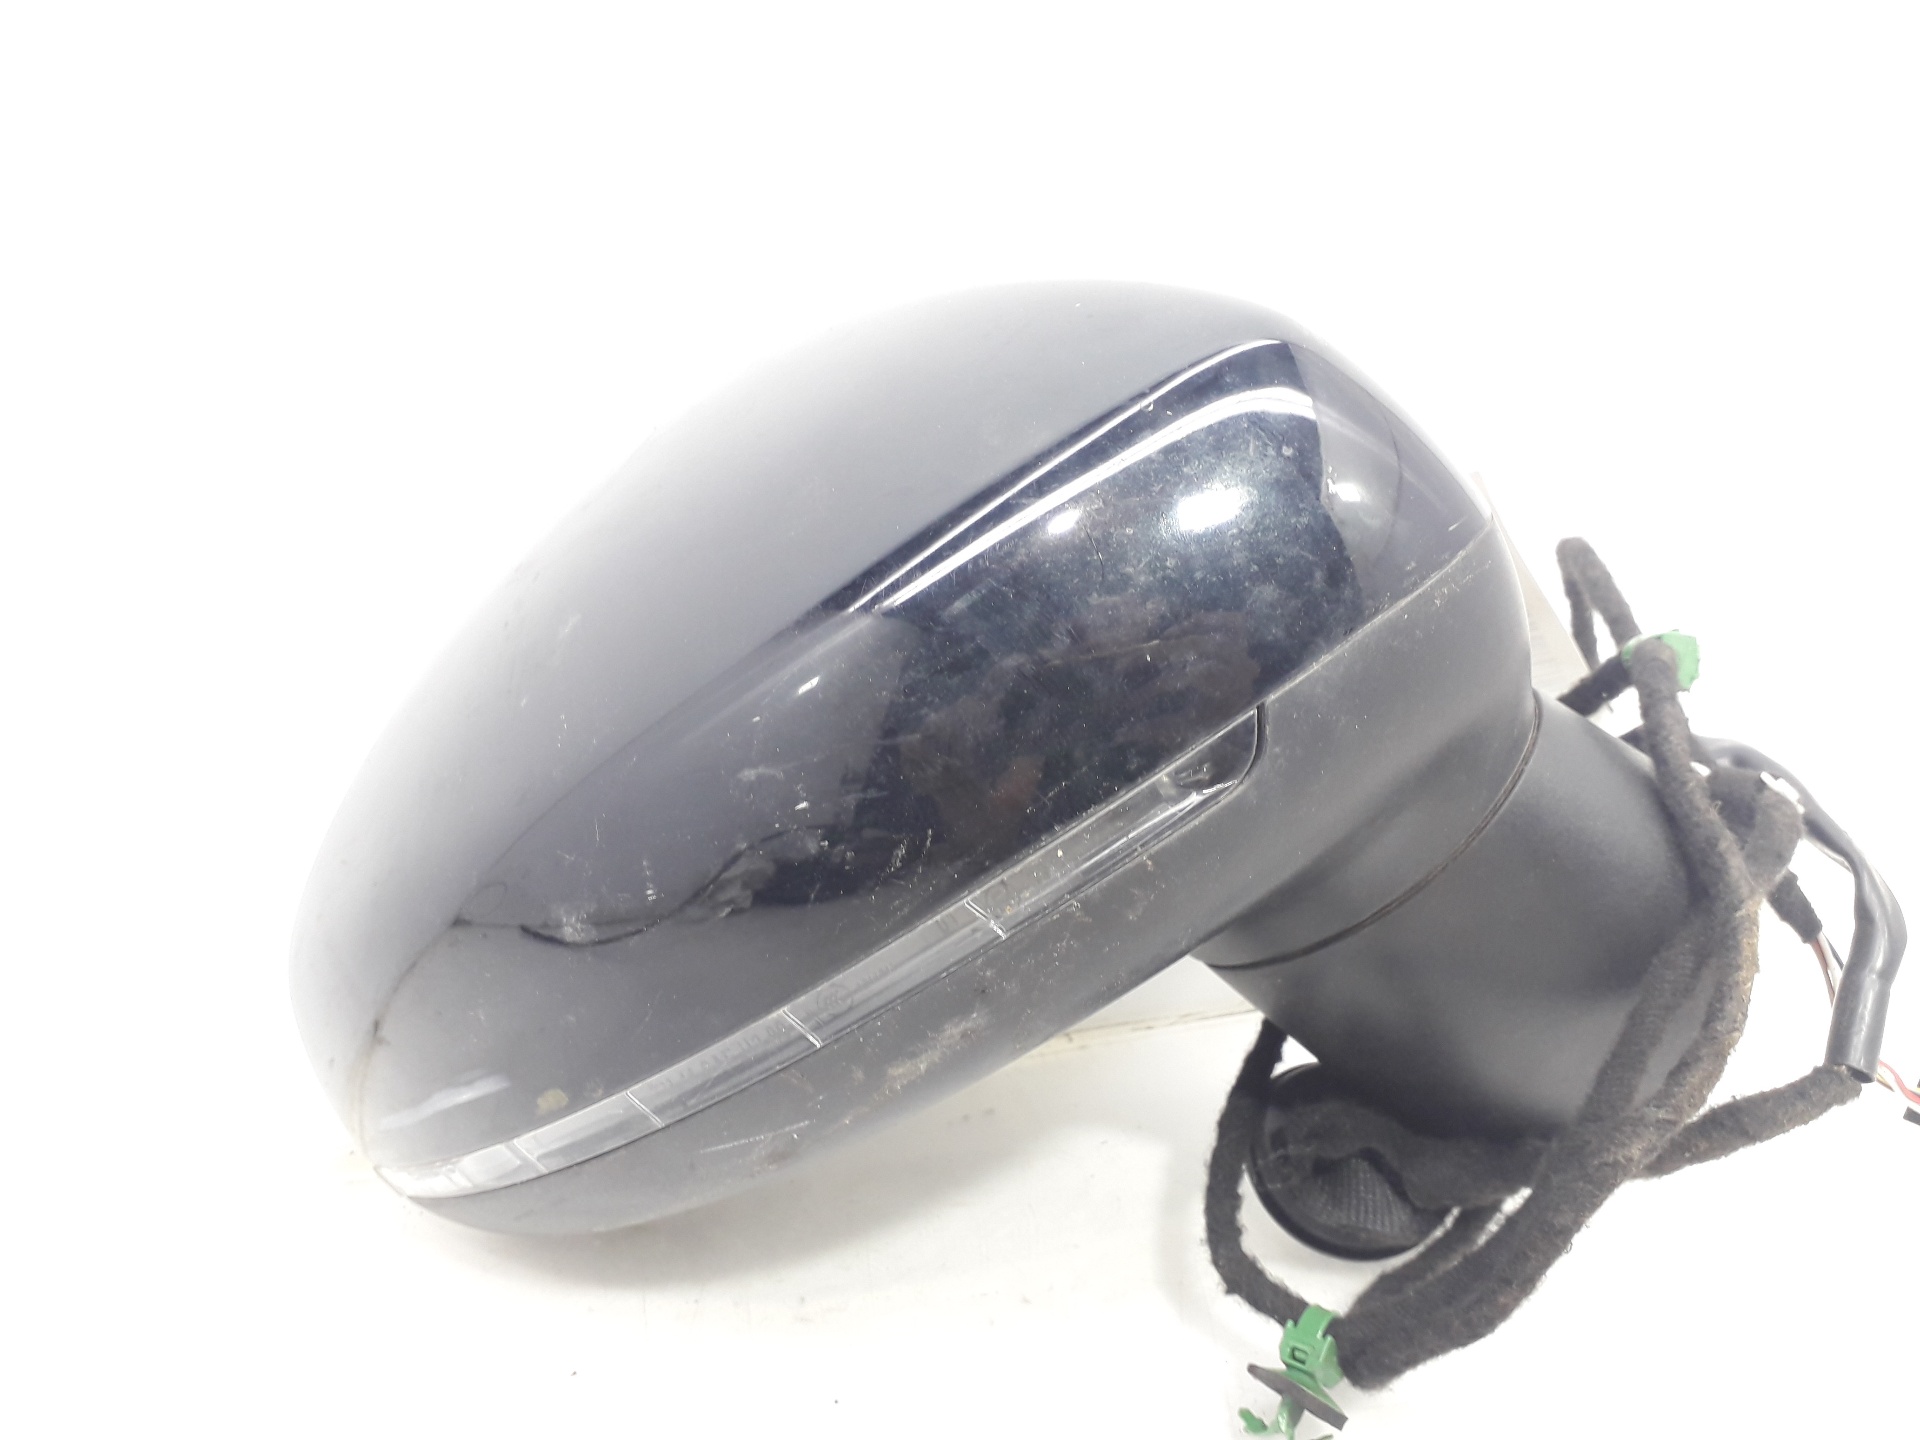 AUDI A7 C7/4G (2010-2020) Right Side Wing Mirror 8X1857410S 18798859